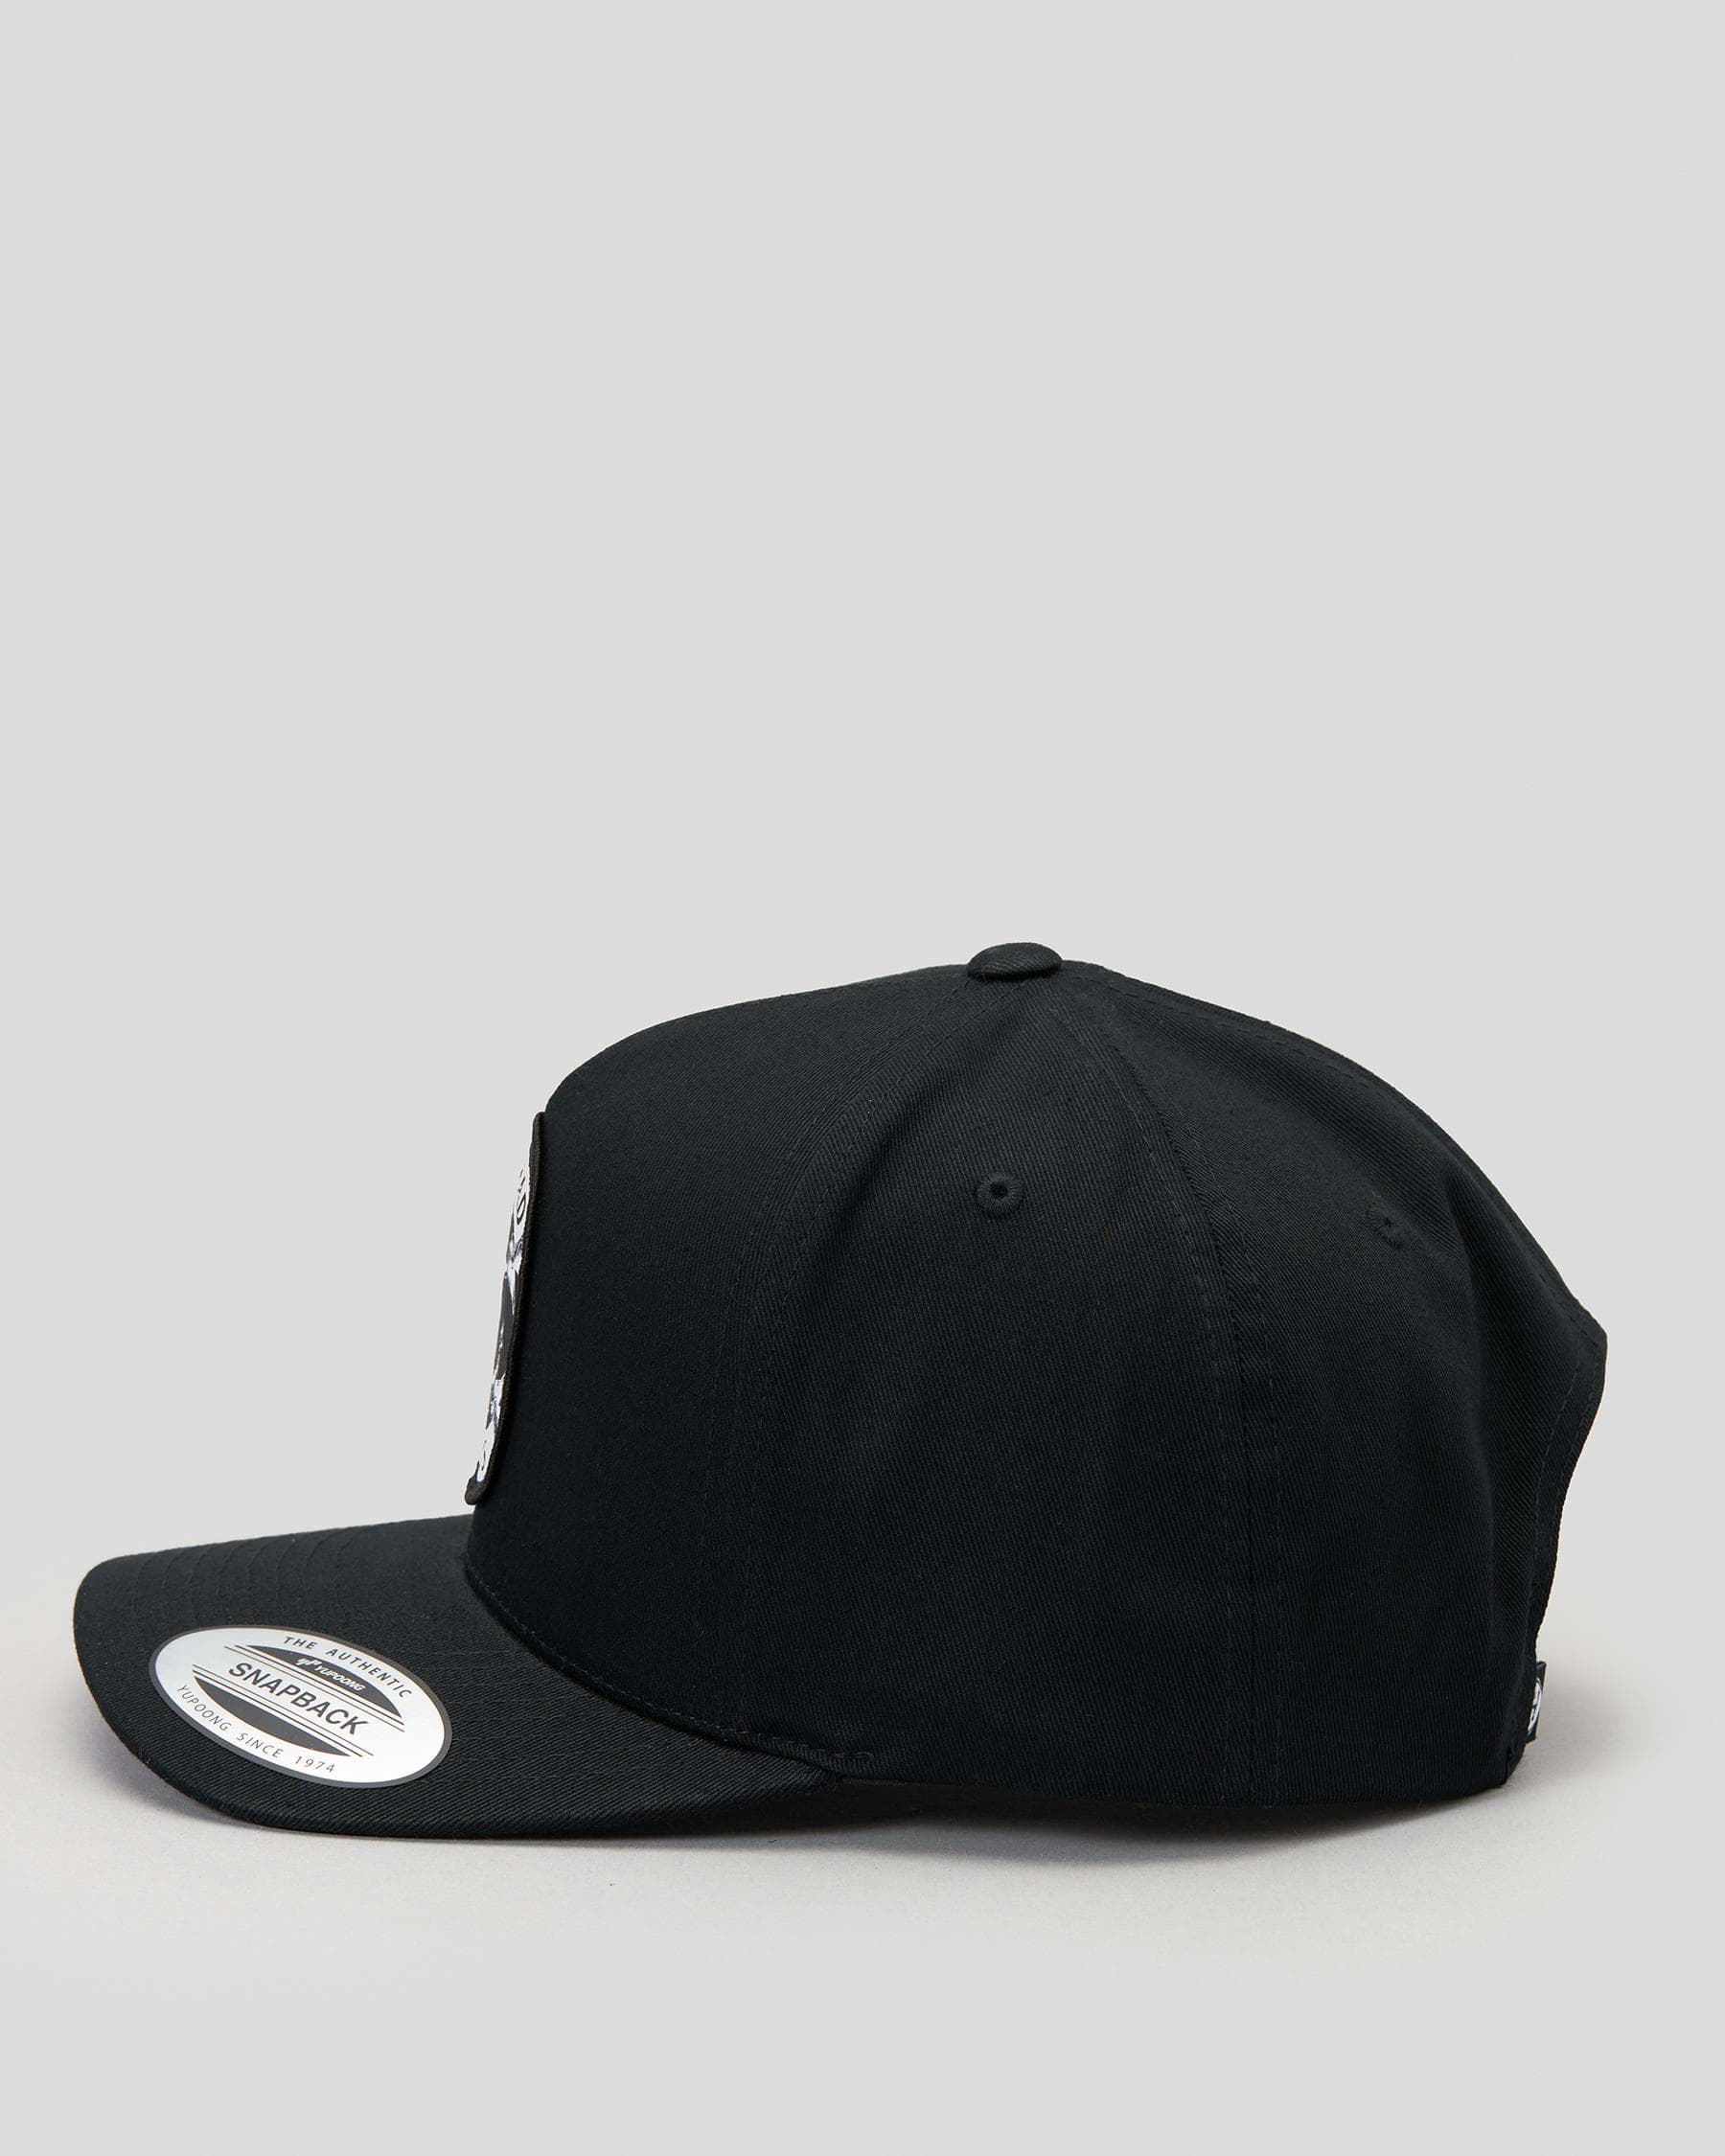 The Mad Hueys Anchorage Cap In Black - FREE* Shipping & Easy Returns ...